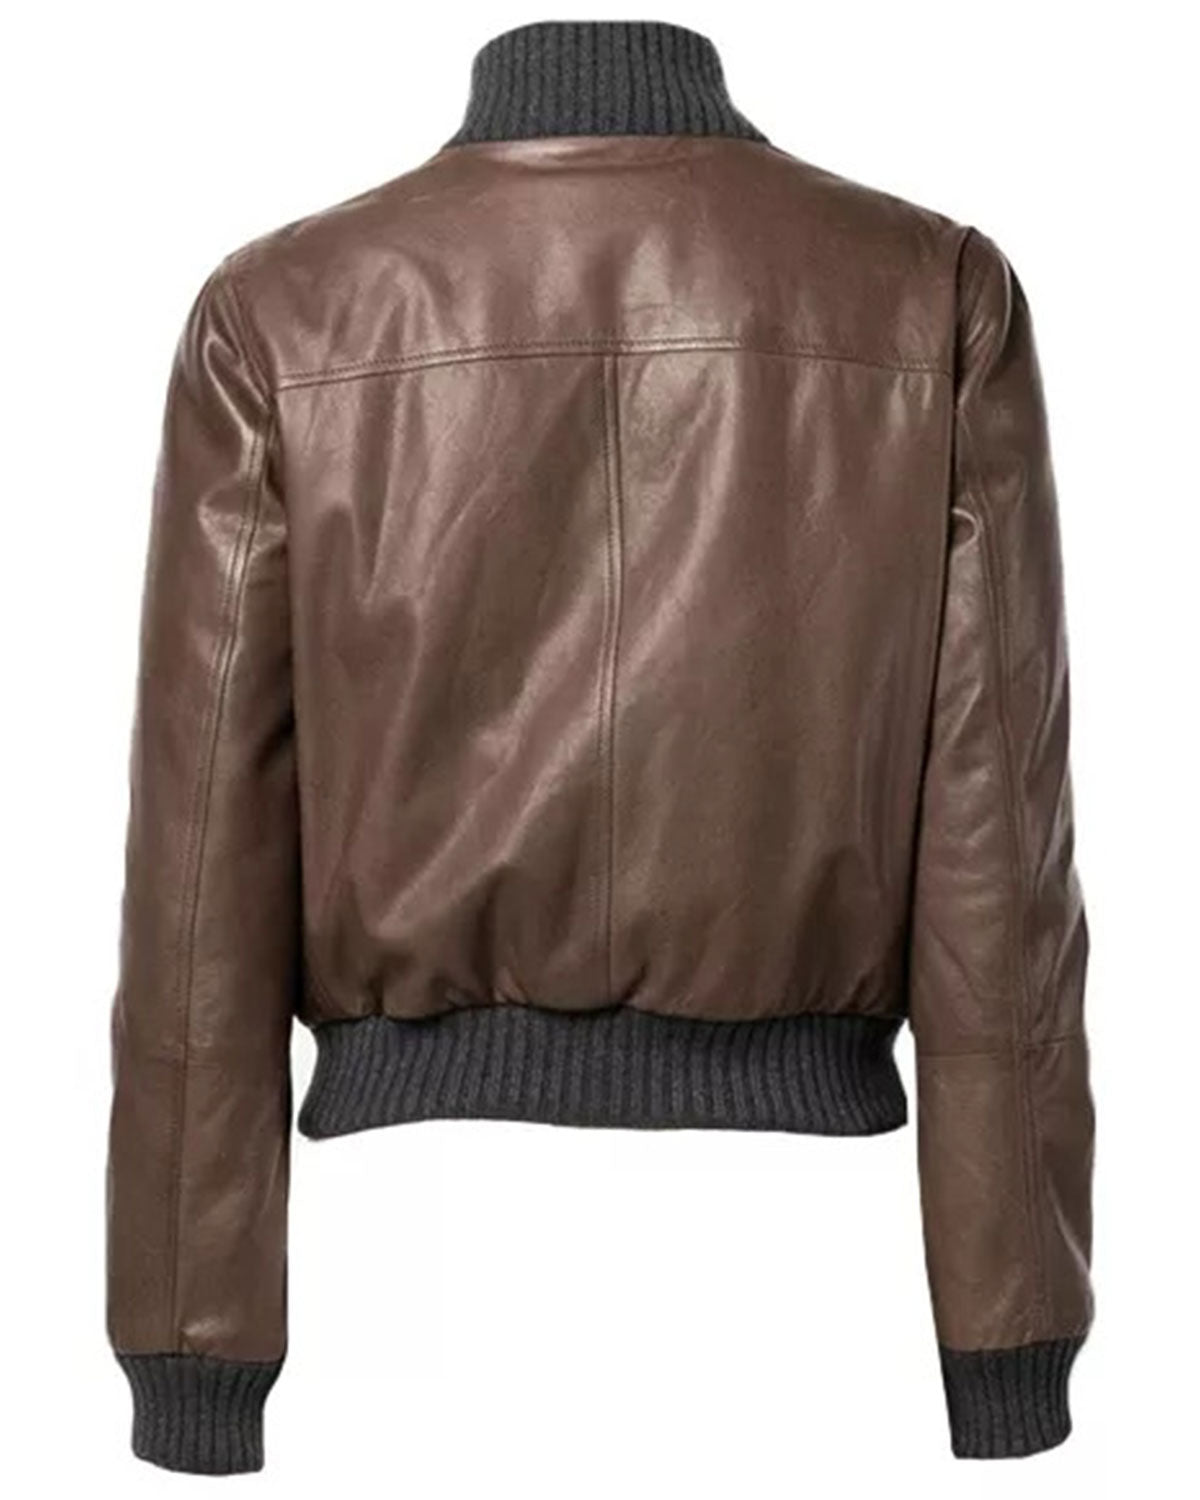 Elite Brown Leather Bomber Jacket Womens